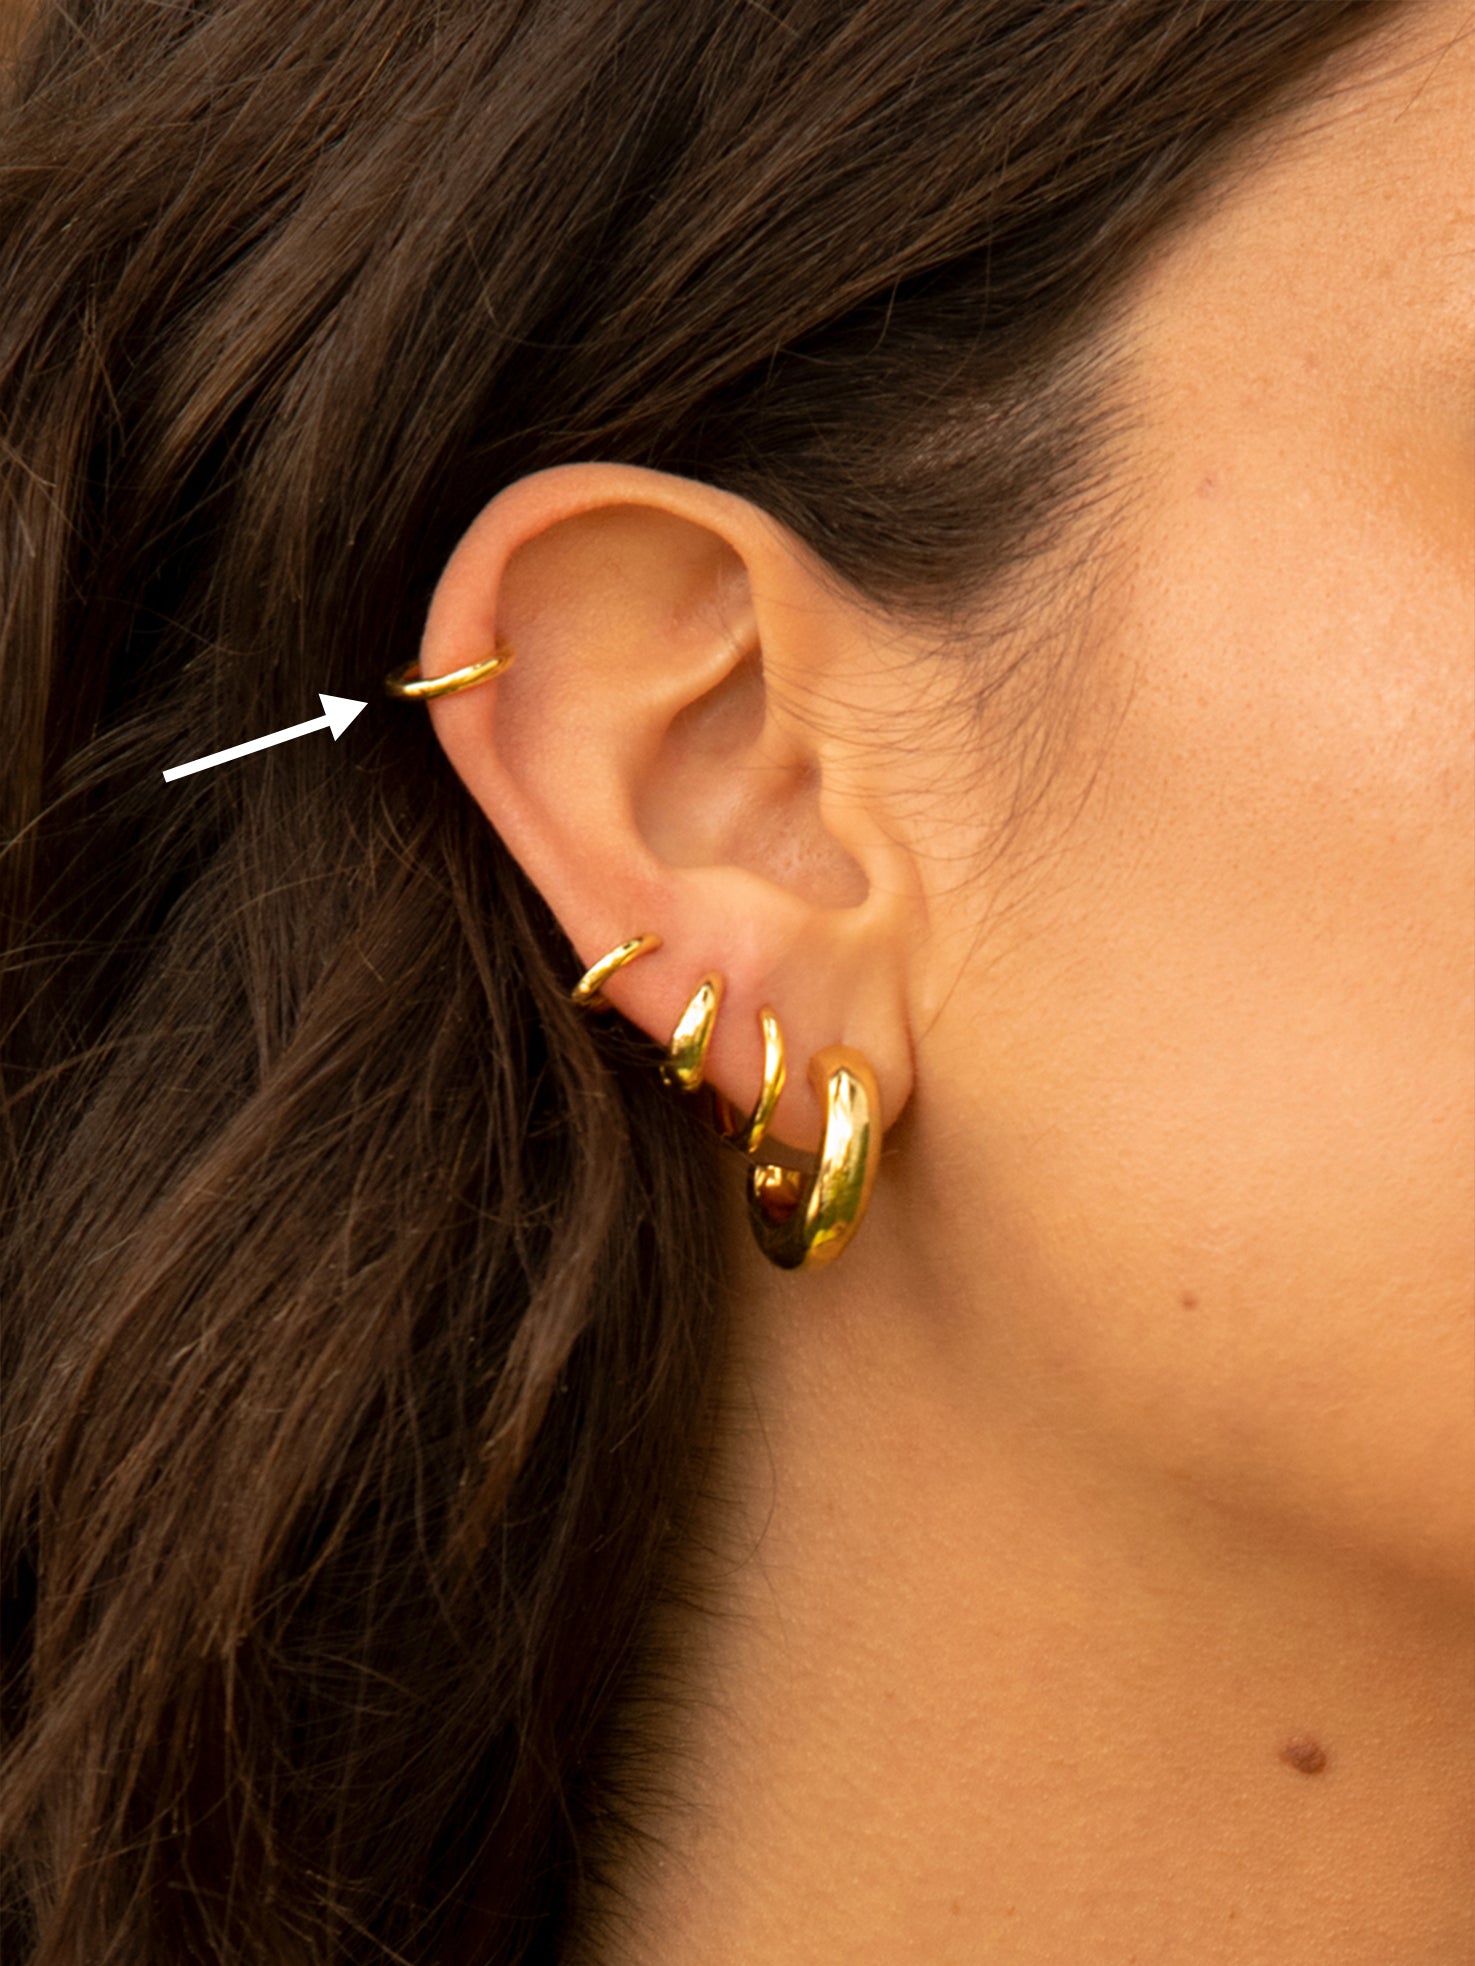 gold ear cuff earrings for conch helix tragus